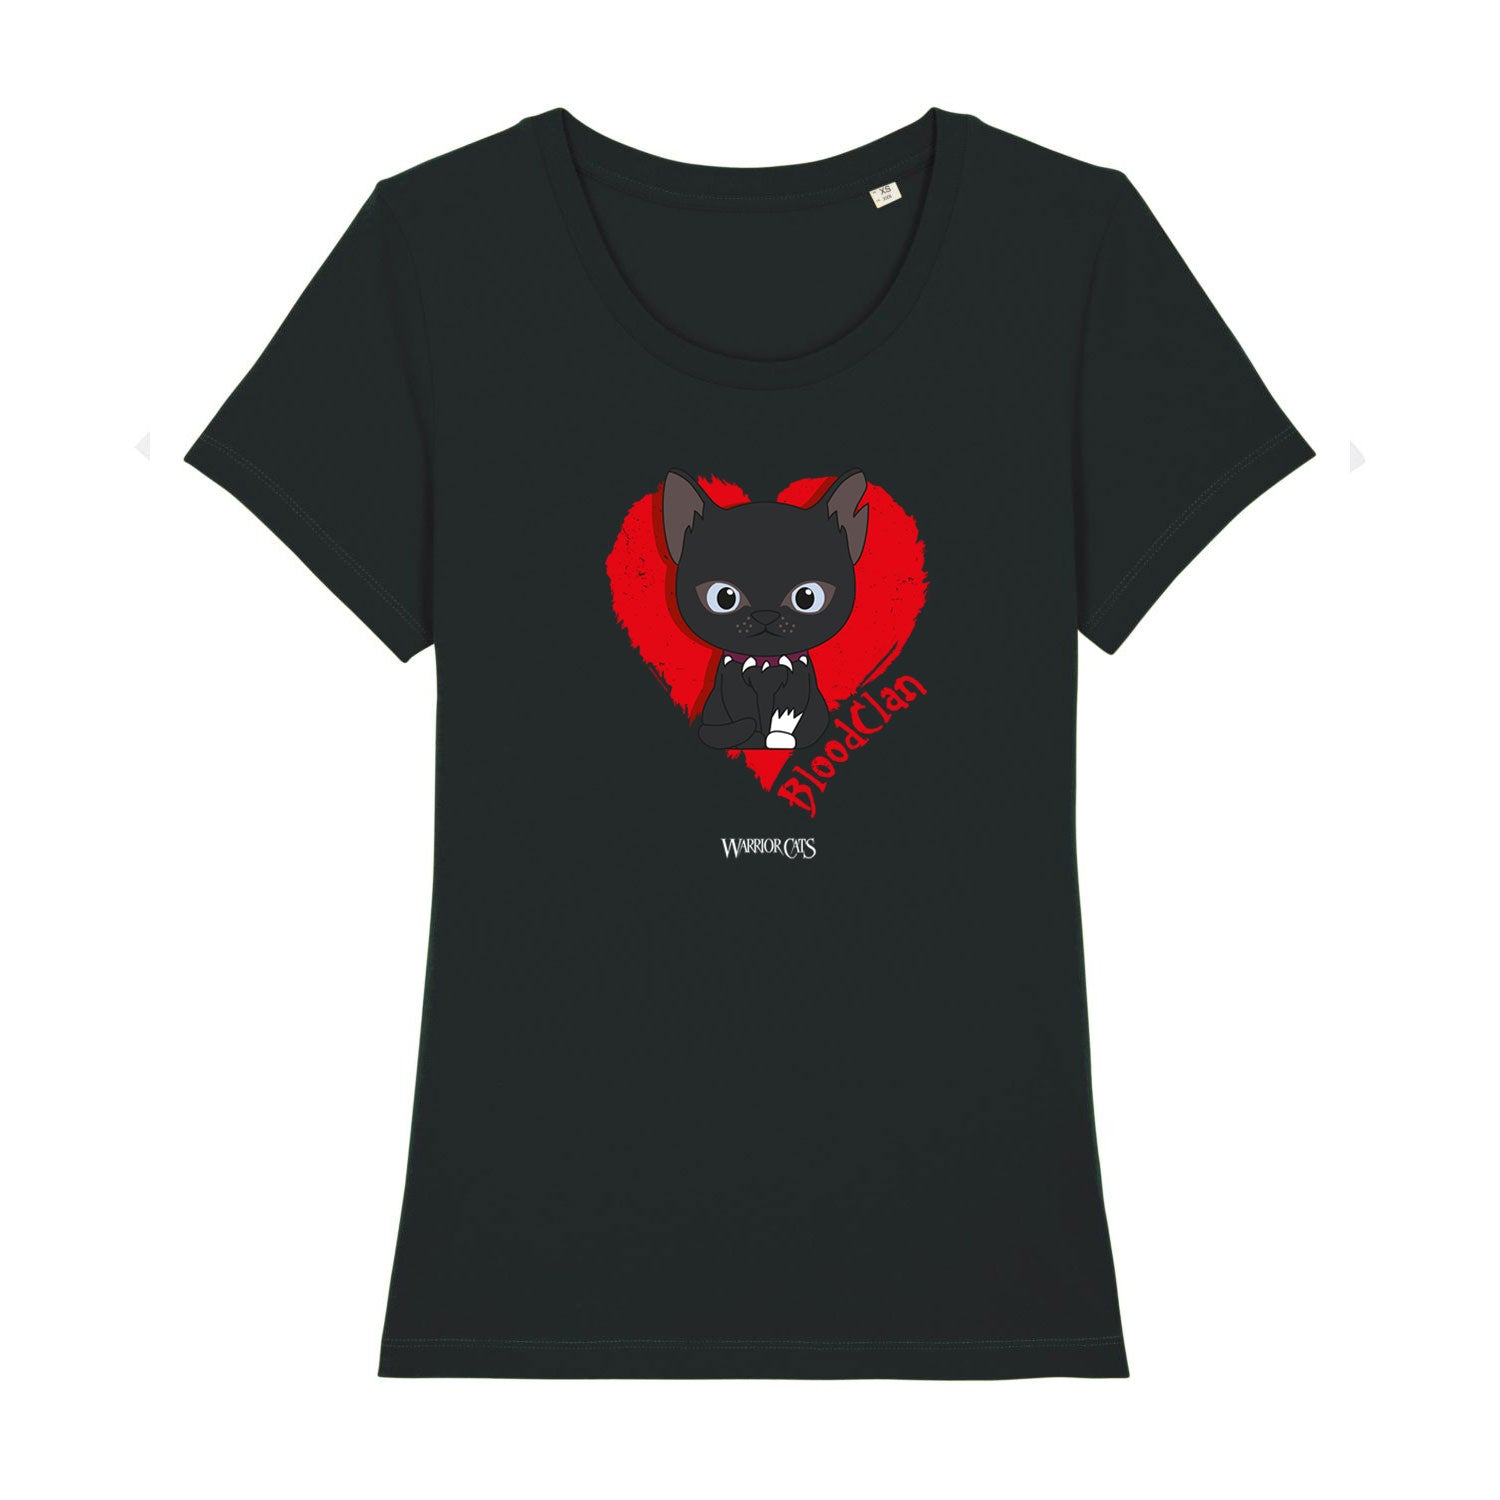 Warrior Cats: Scourge and Tiny Kids T-Shirt for Sale by catdoq